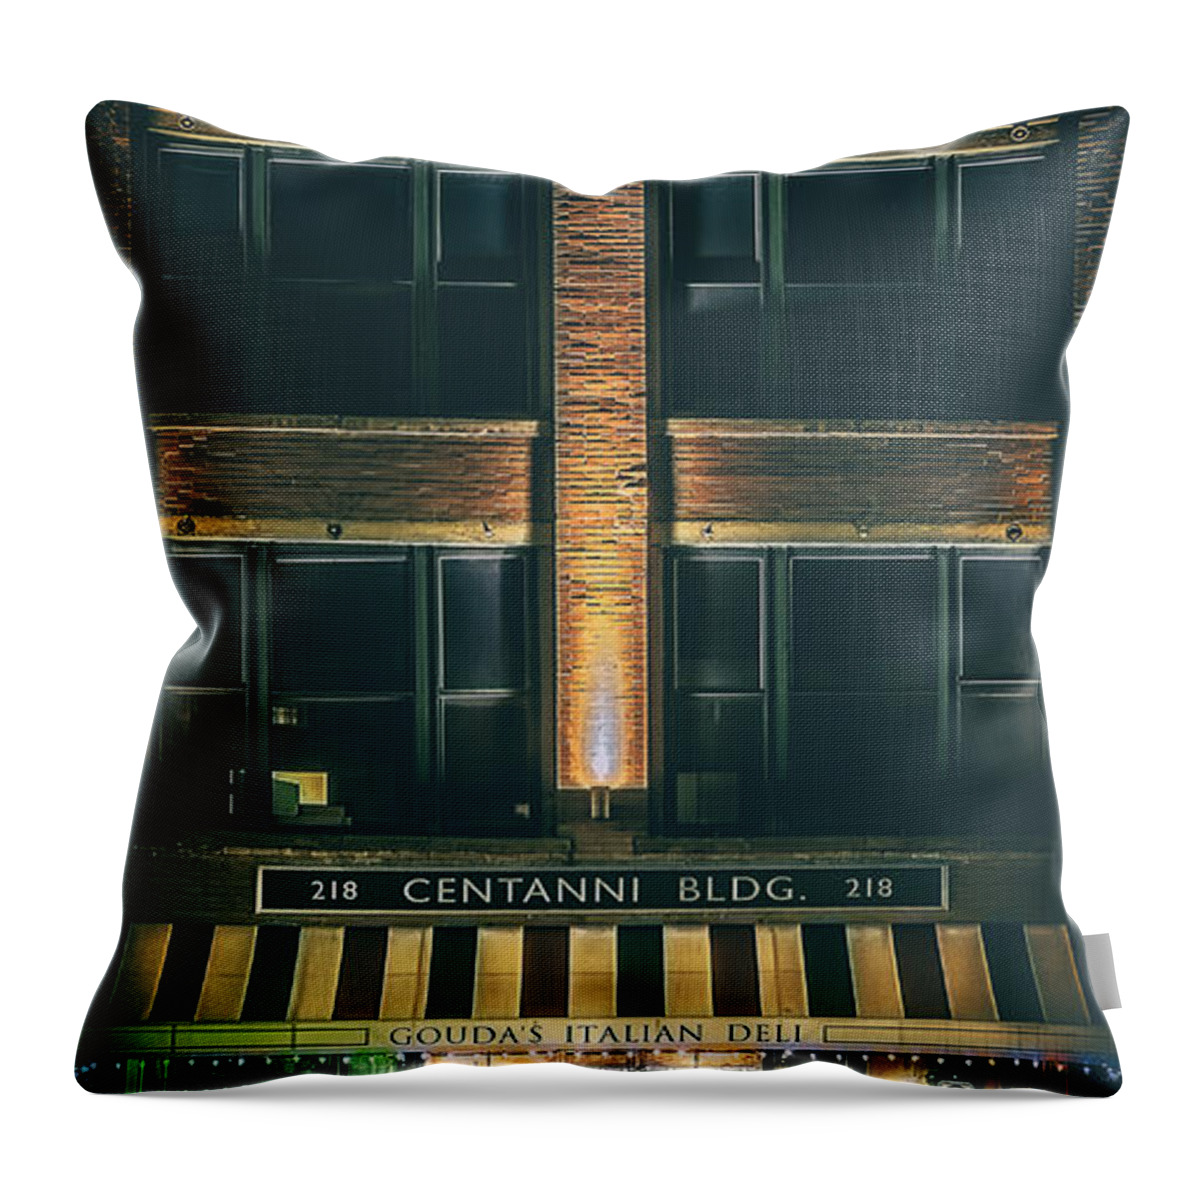 Architecture Throw Pillow featuring the photograph Goudas Italian Deli Color by Scott Norris